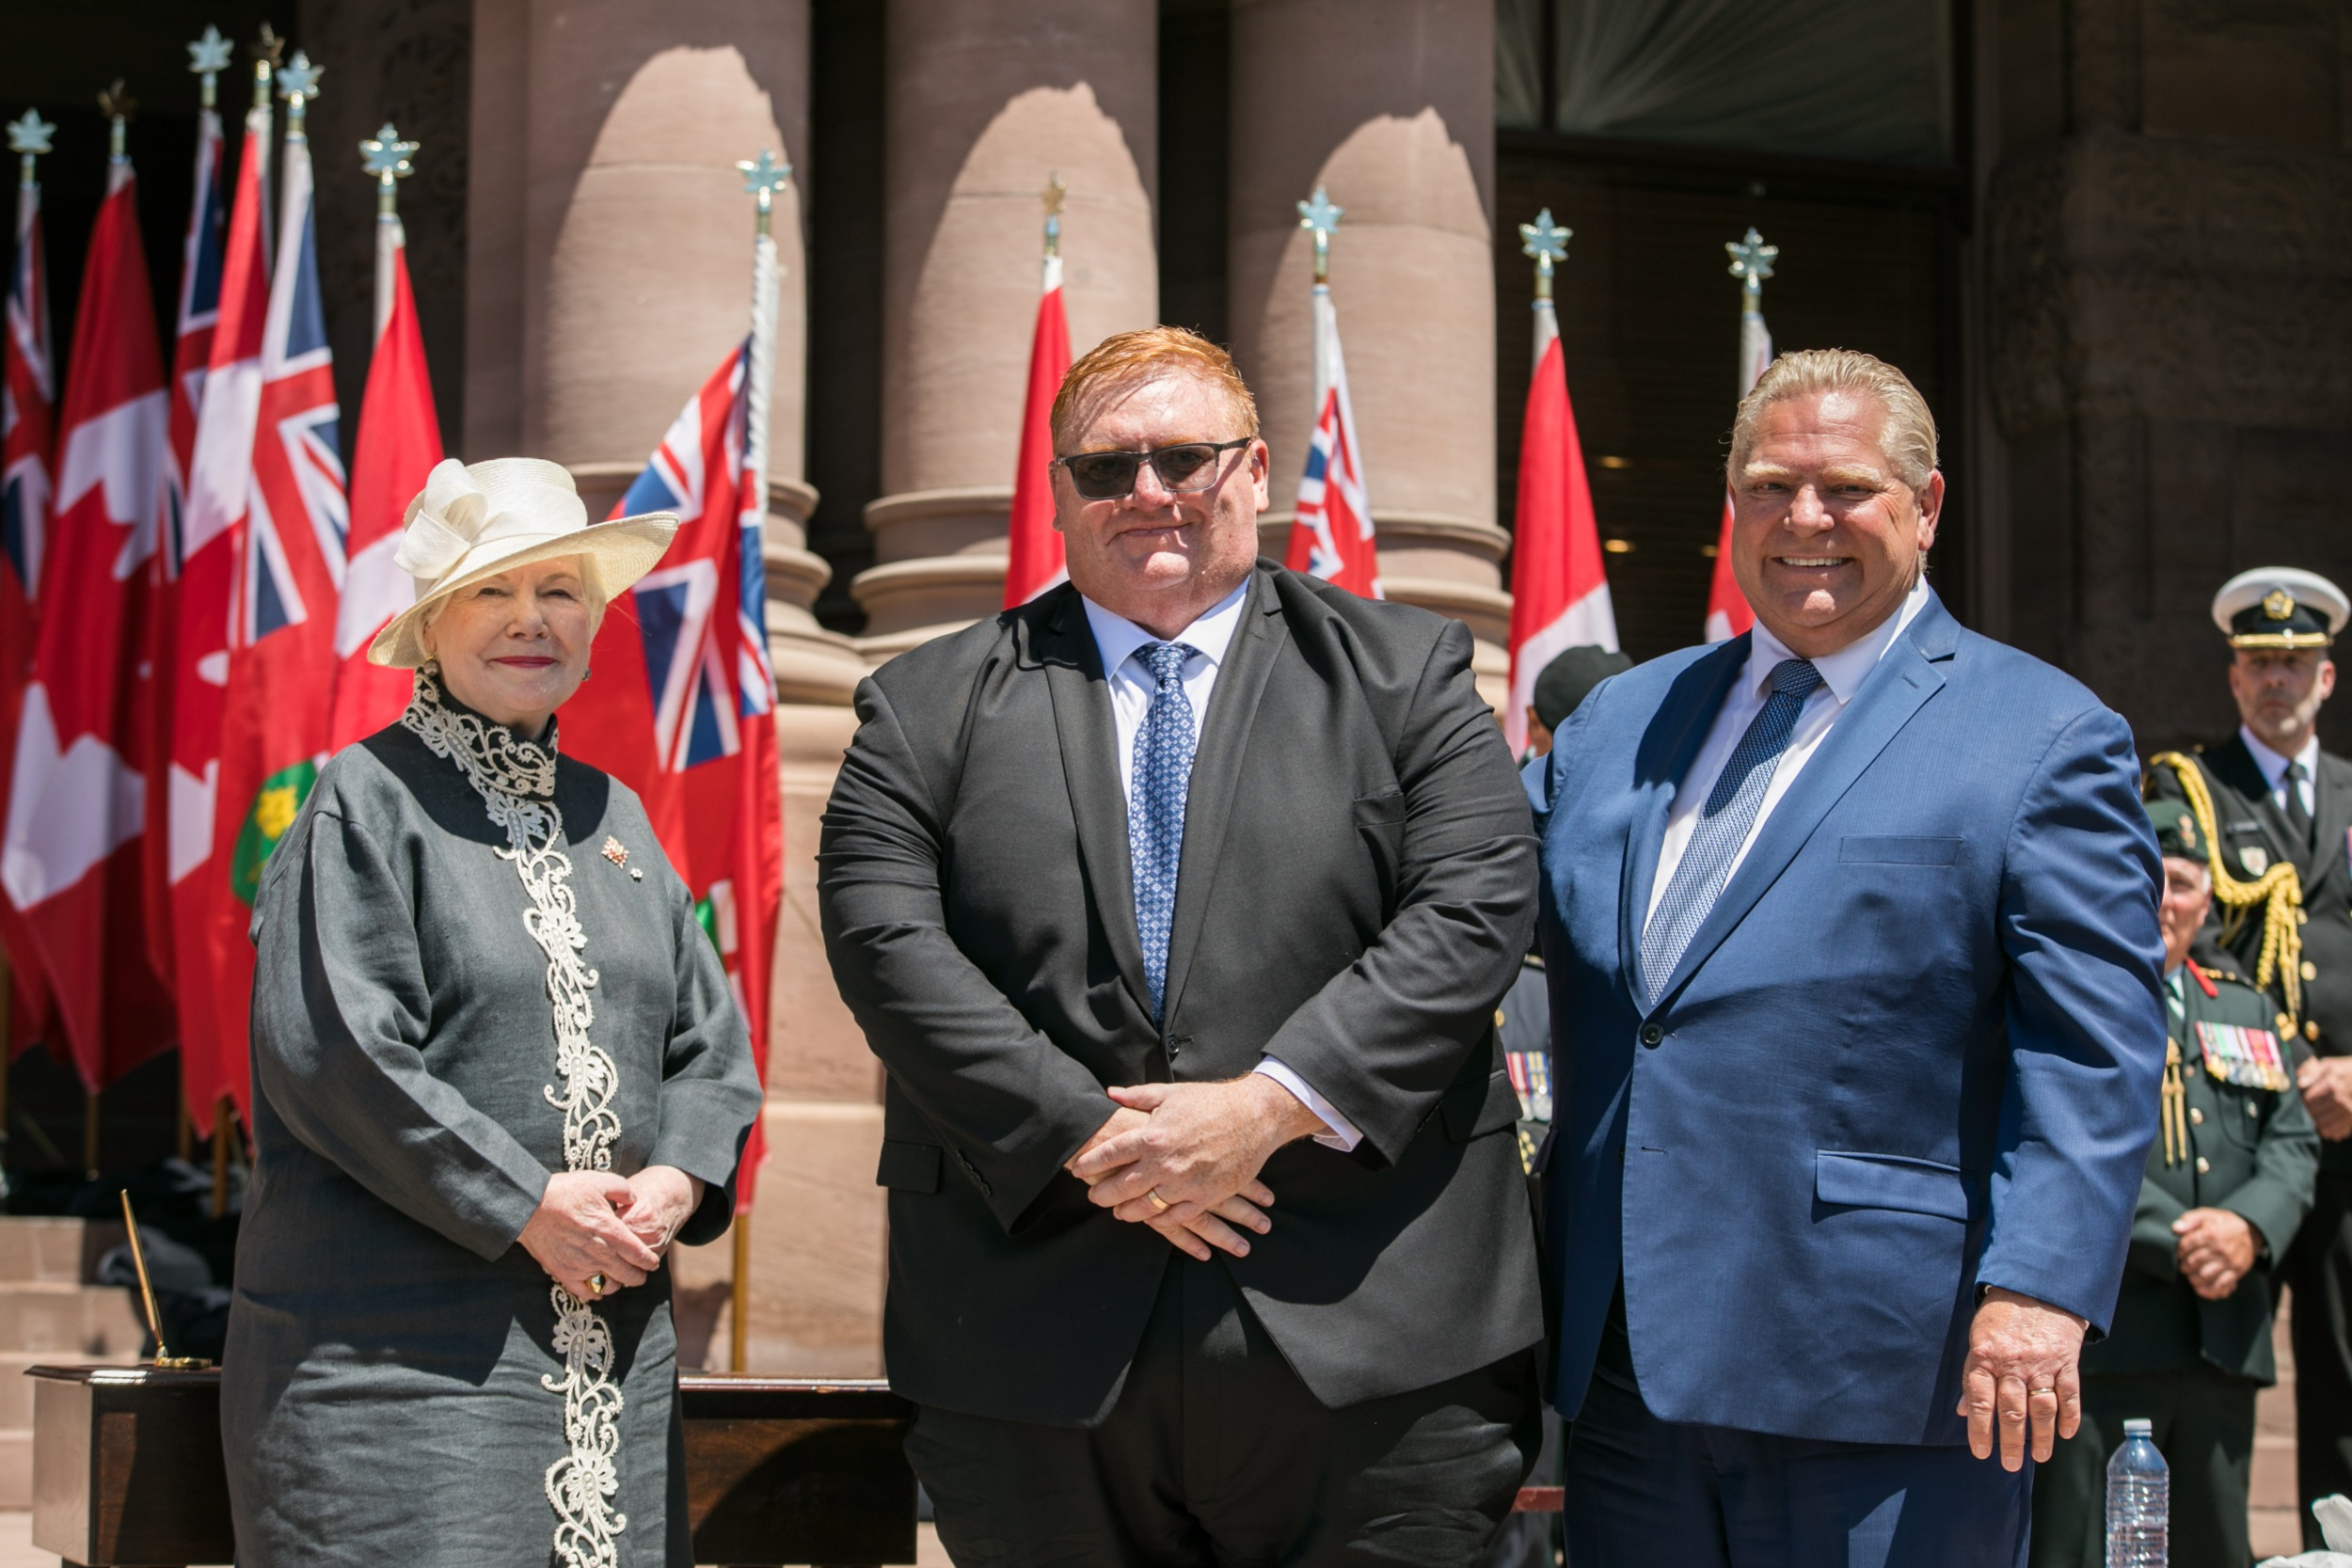 Ontario Natural Resources Minister Graydon Smith poses with a smiling Premier Doug Ford and Lt.-Gov. Elizabeth Dowdeswell in front of the legislature at Queen's Park.